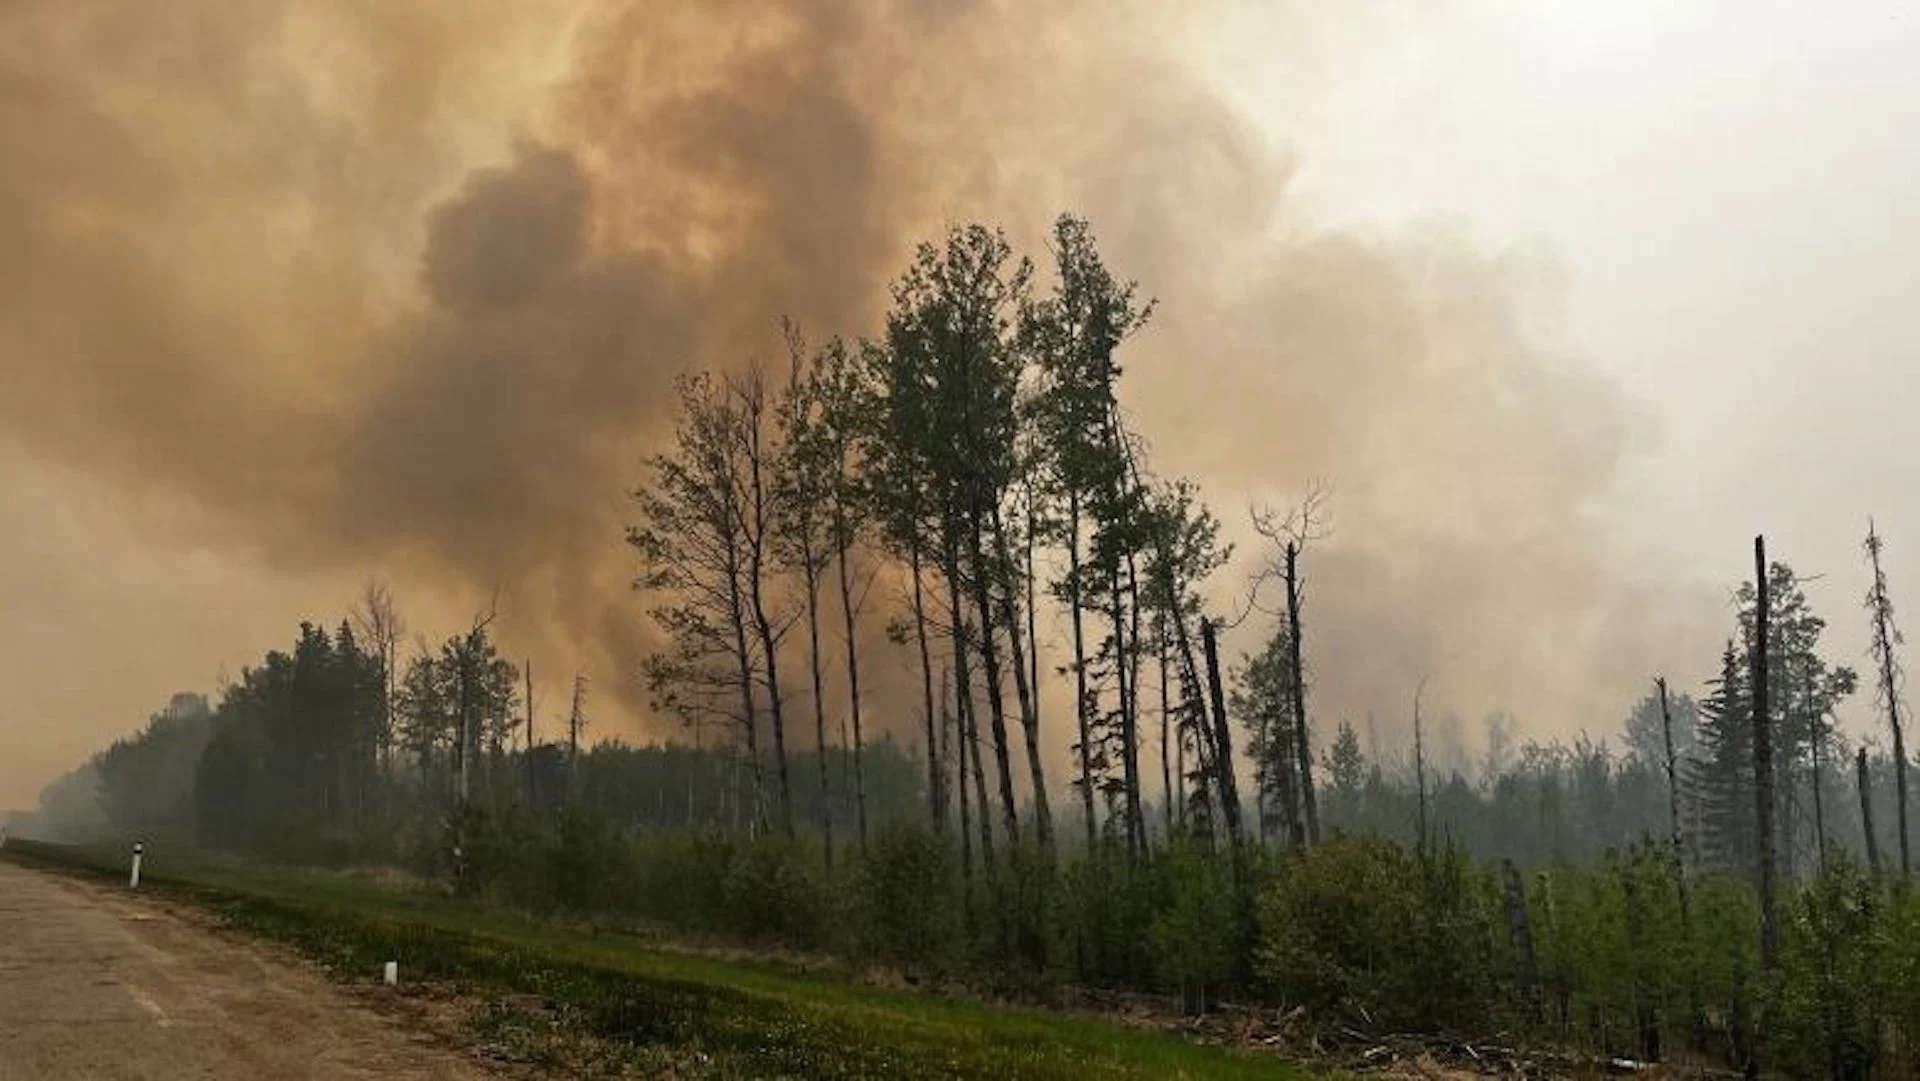 Smoke offers some relief for Alberta firefighters in wildfire battle